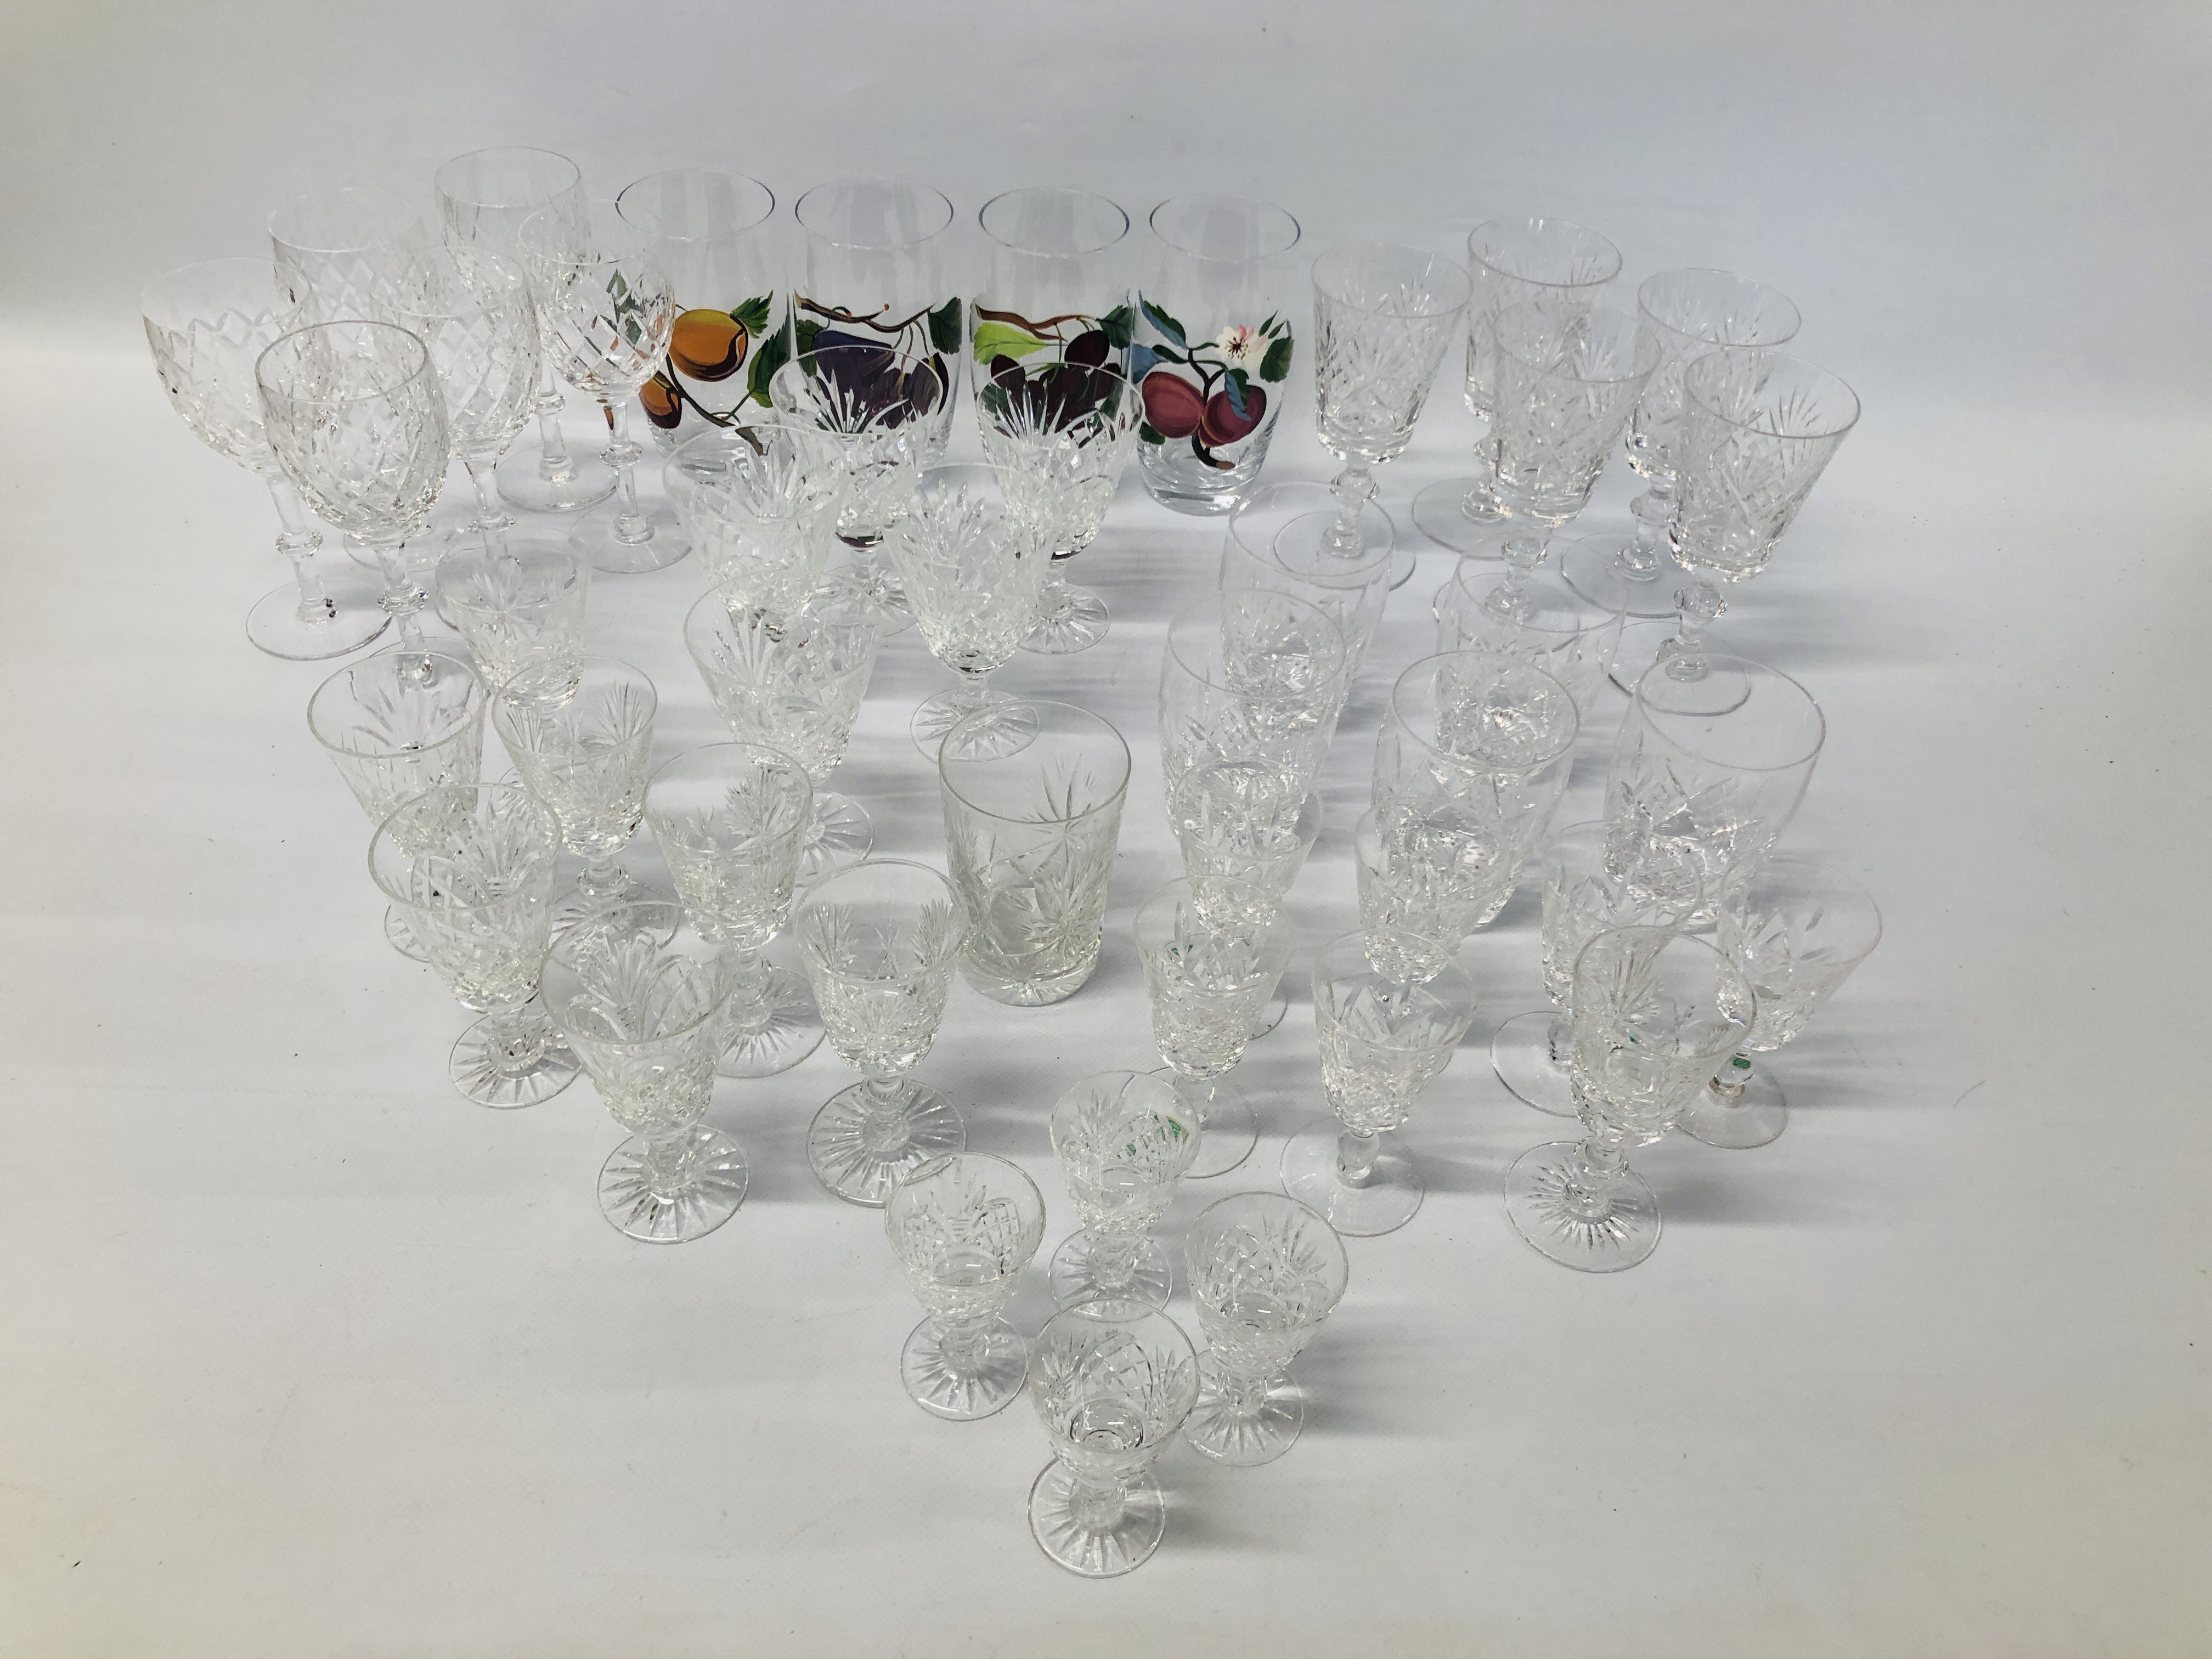 COLLECTION OF GOOD QUALITY CUT GLASS CRYSTAL DRINKING VESSELS ALONG WITH A SET OF 4 HAND PAINTED